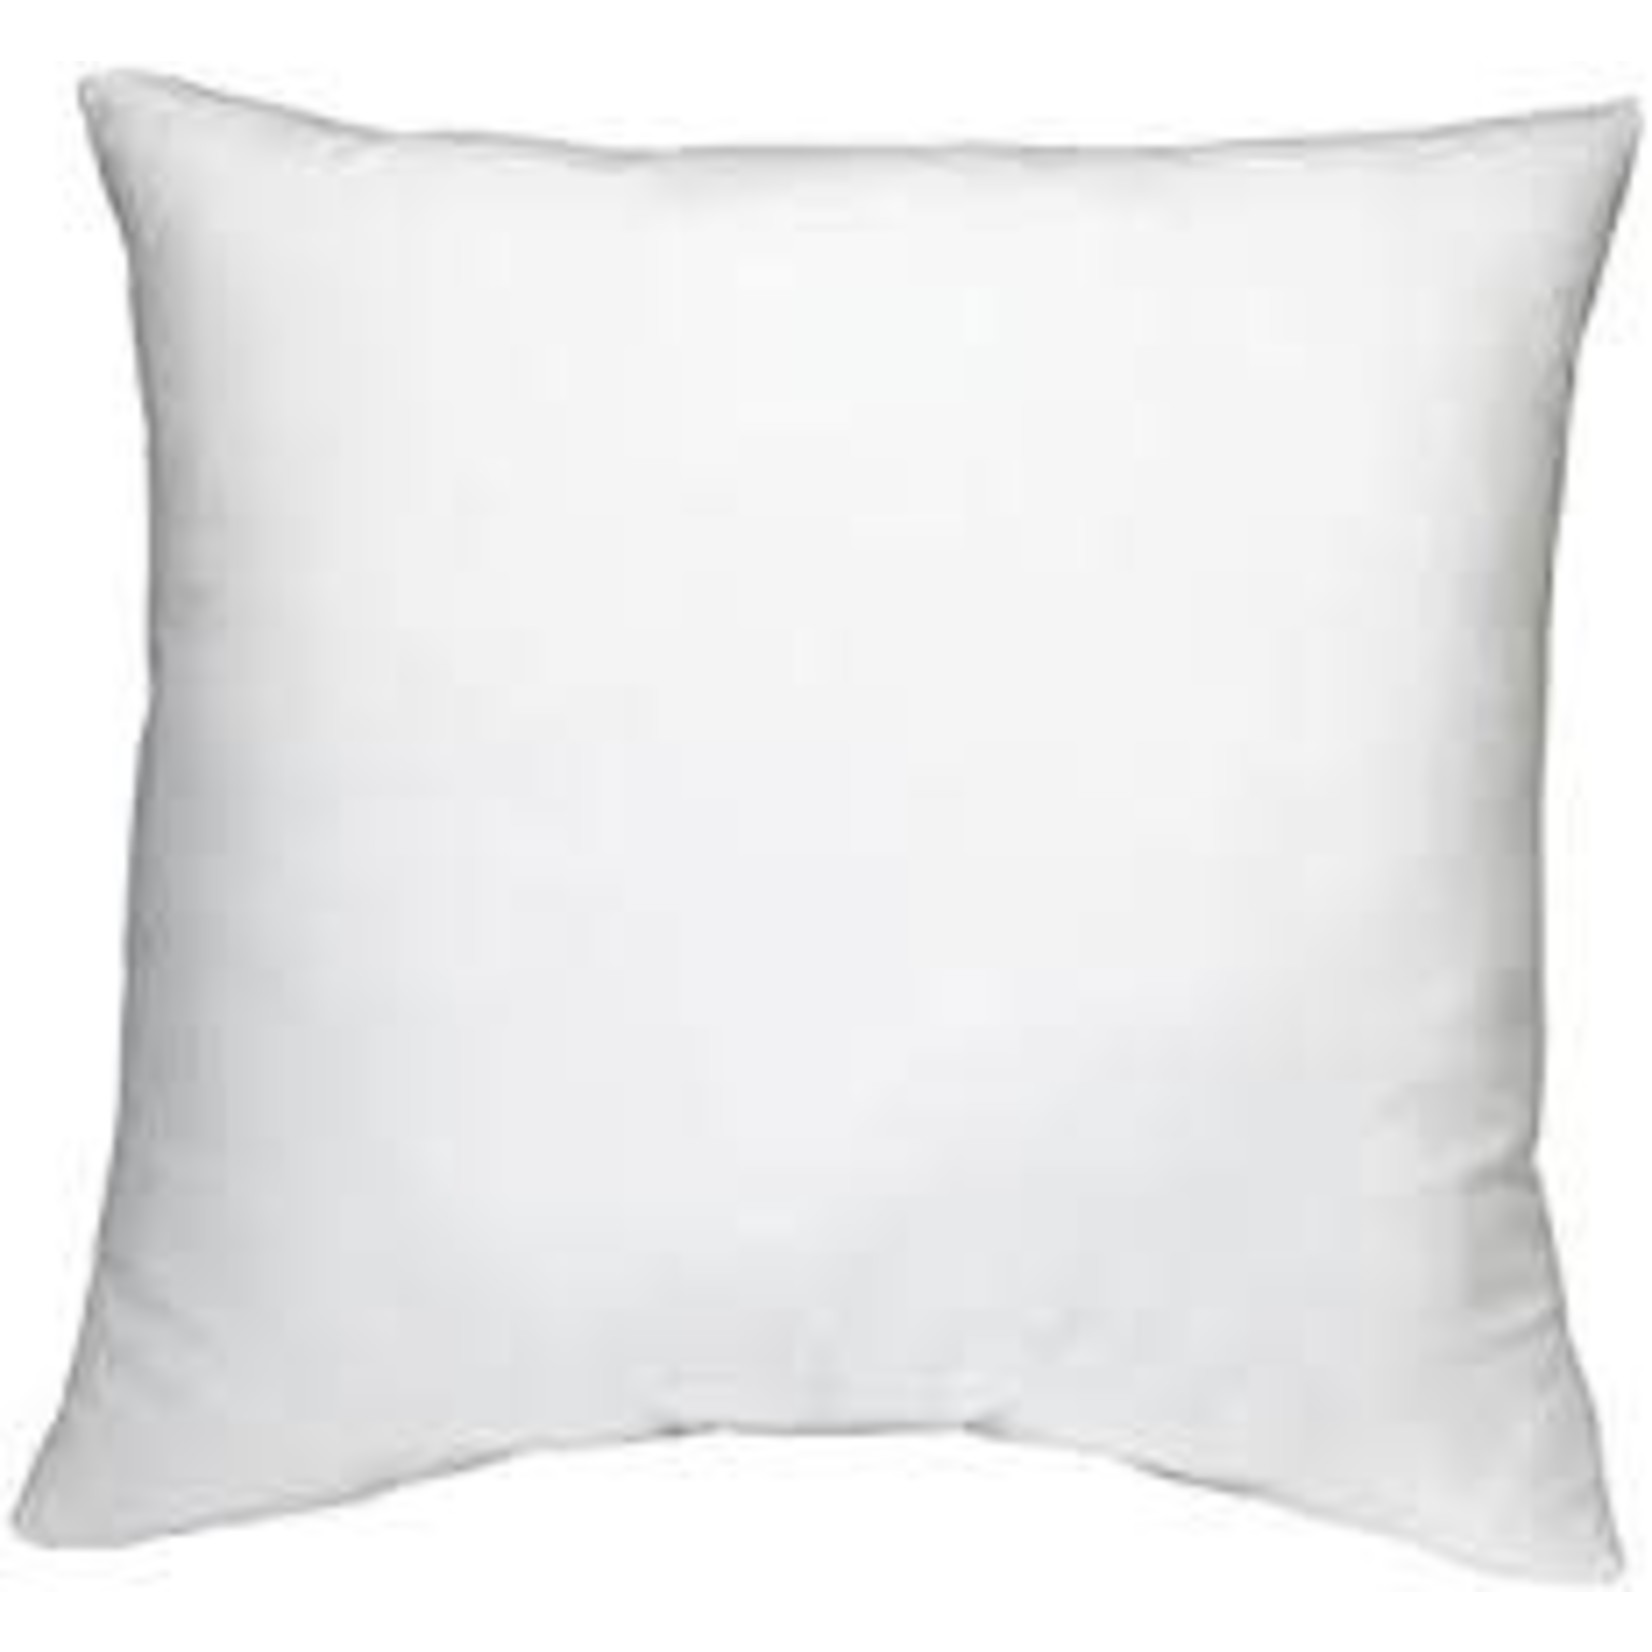 16IN X 16IN PILLOW FORM